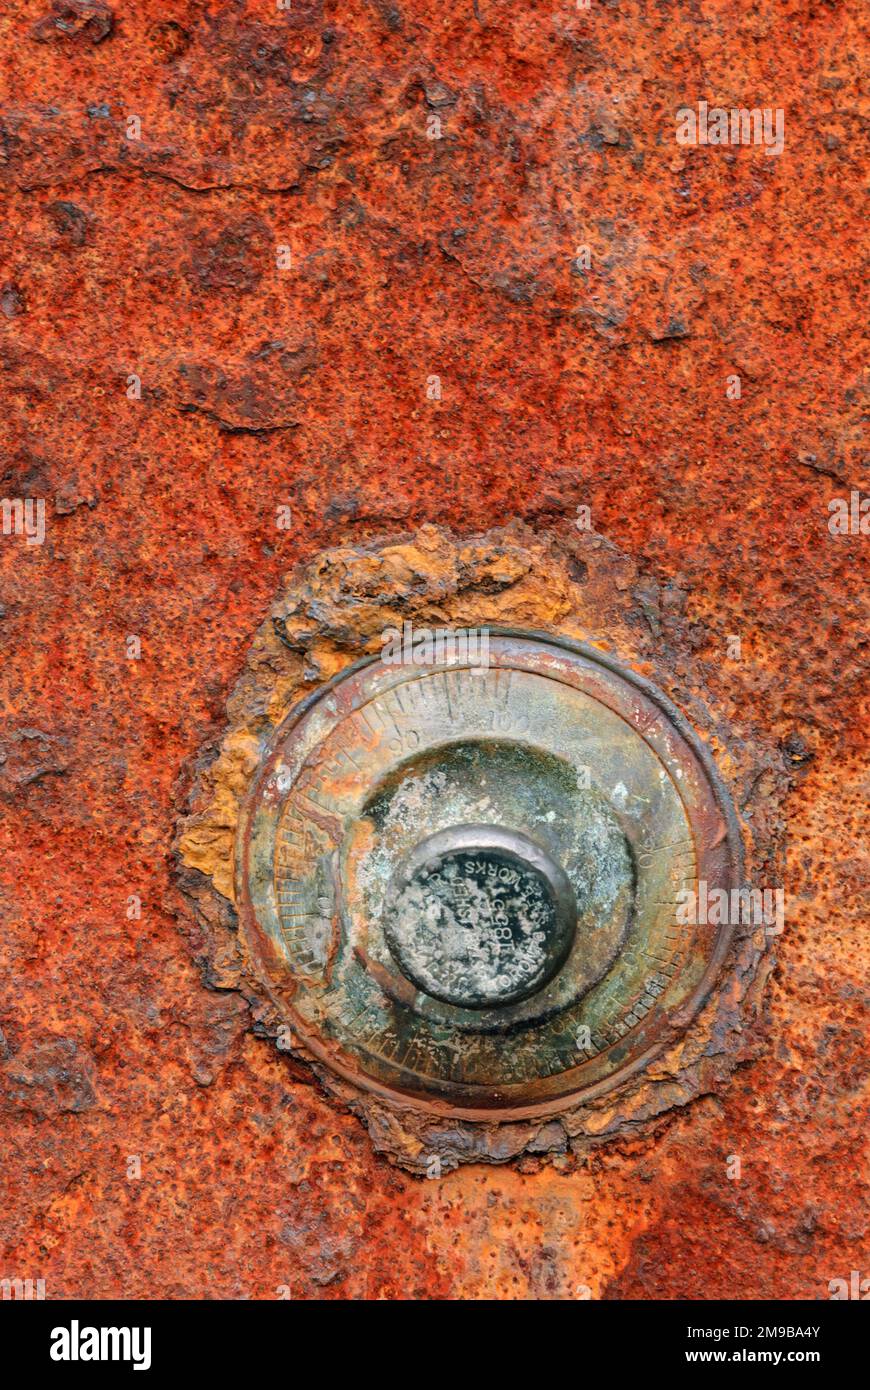 Rusted combination lock on a red rusty safe door Stock Photo